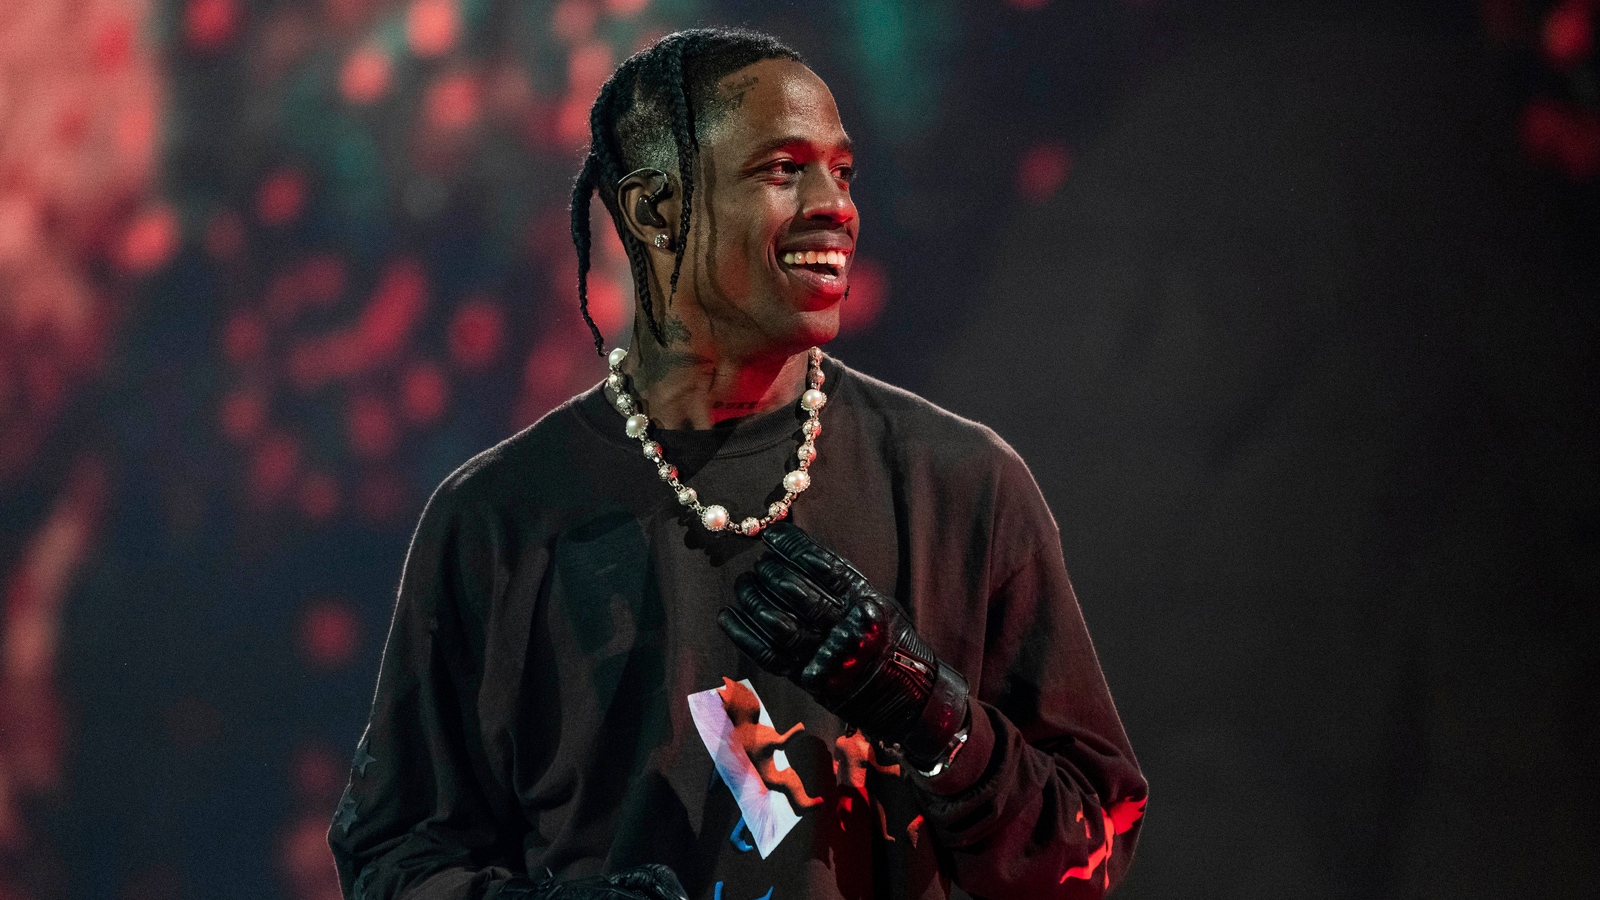 Houston Open Concert Series canceled in light of Astroworld